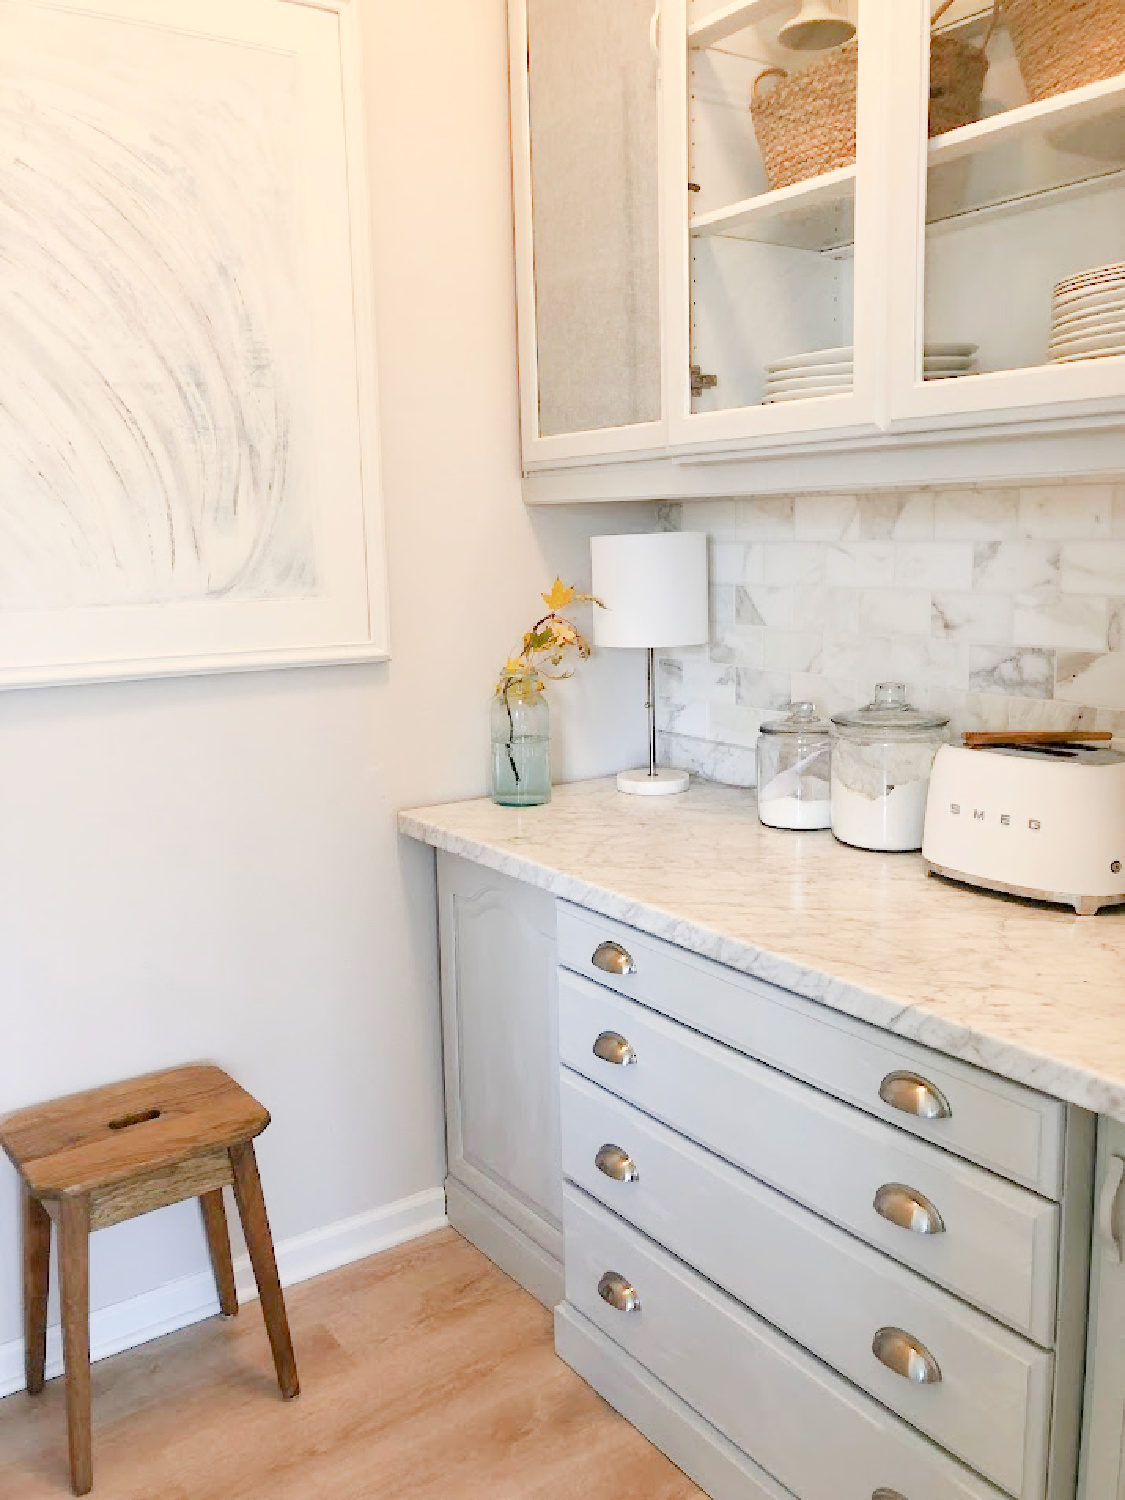 Renovated pantry with light grey cabinets (50% Farrow and Ball Pavilion Gray) and calacatta gold marble backsplash - Hello Lovely Studio.